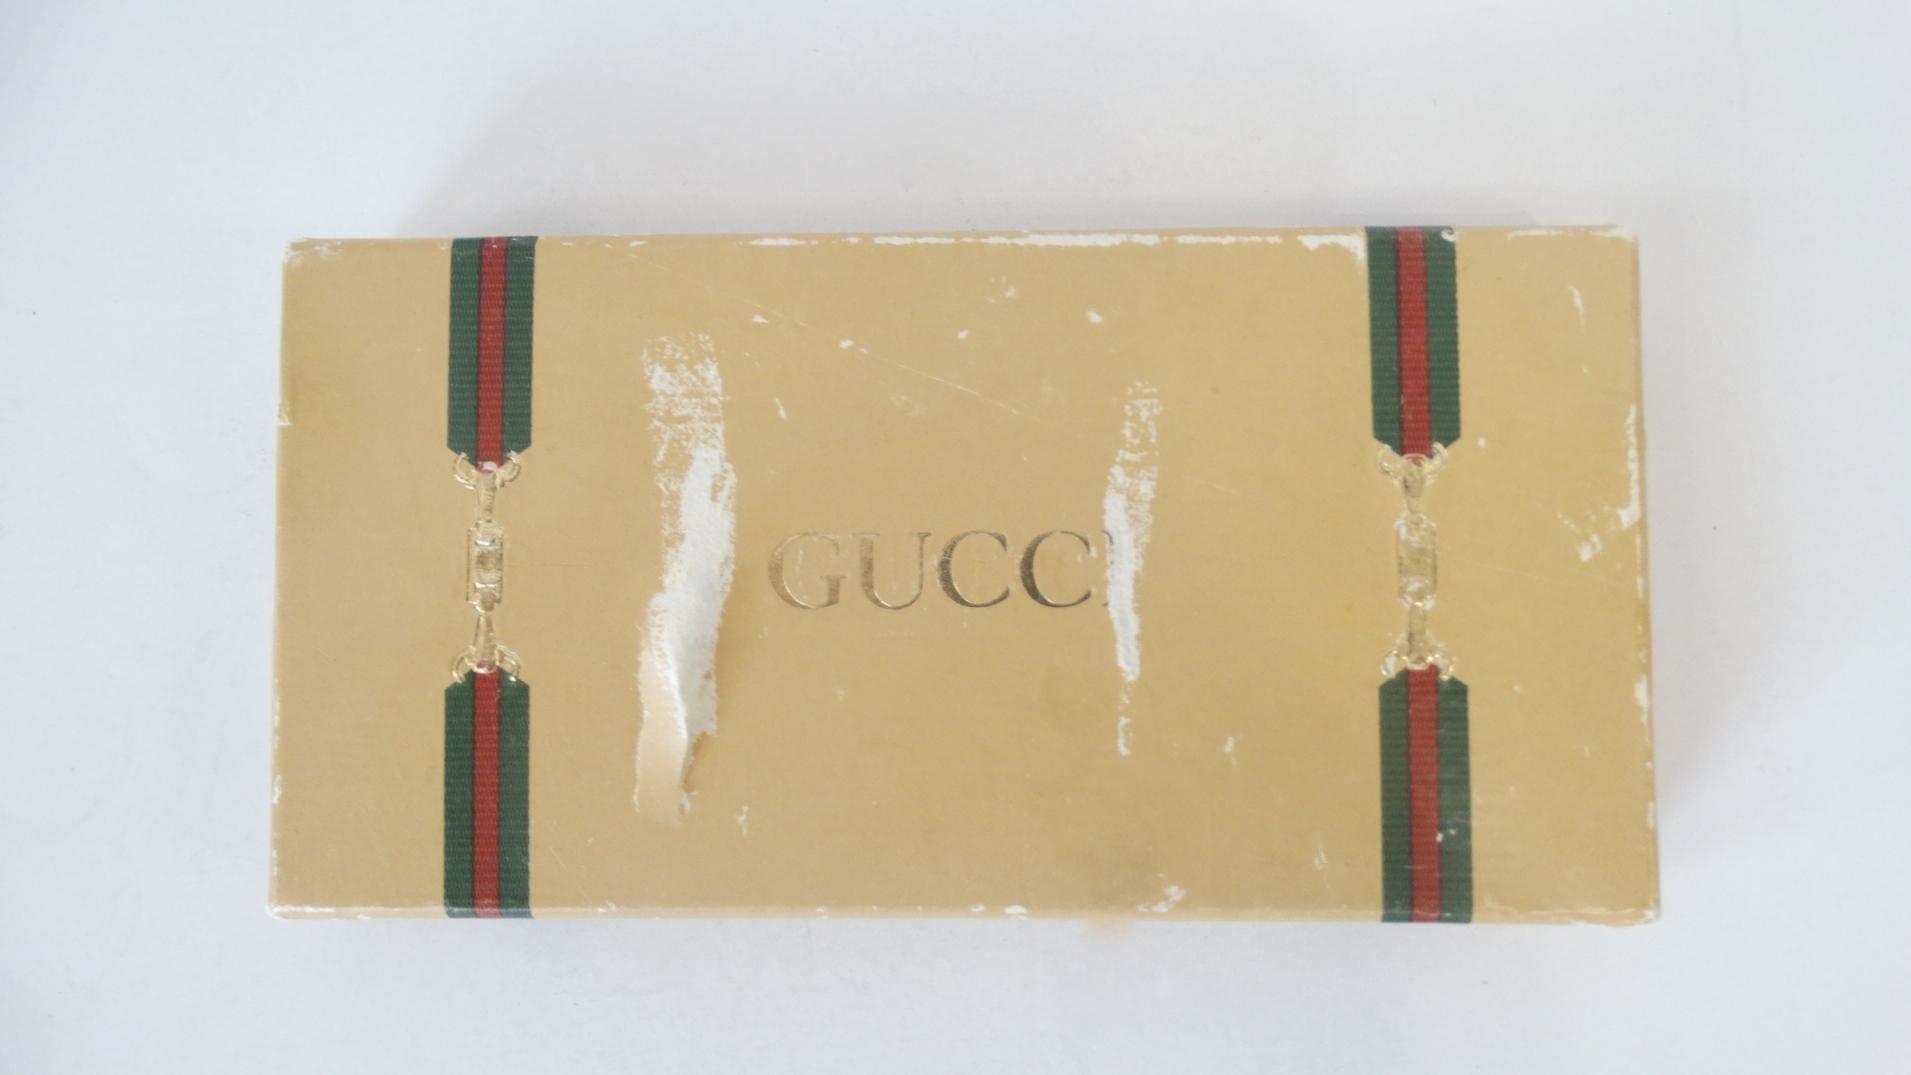 The Most Adorable Vintage Item Is Here! Circa 1970s, this mini Gucci perfume bottle features gold plated metal and beautiful navy blue enamel. The signature overlapping Gucci GG's are featured on the front and back of bottle. Removable lid stamped